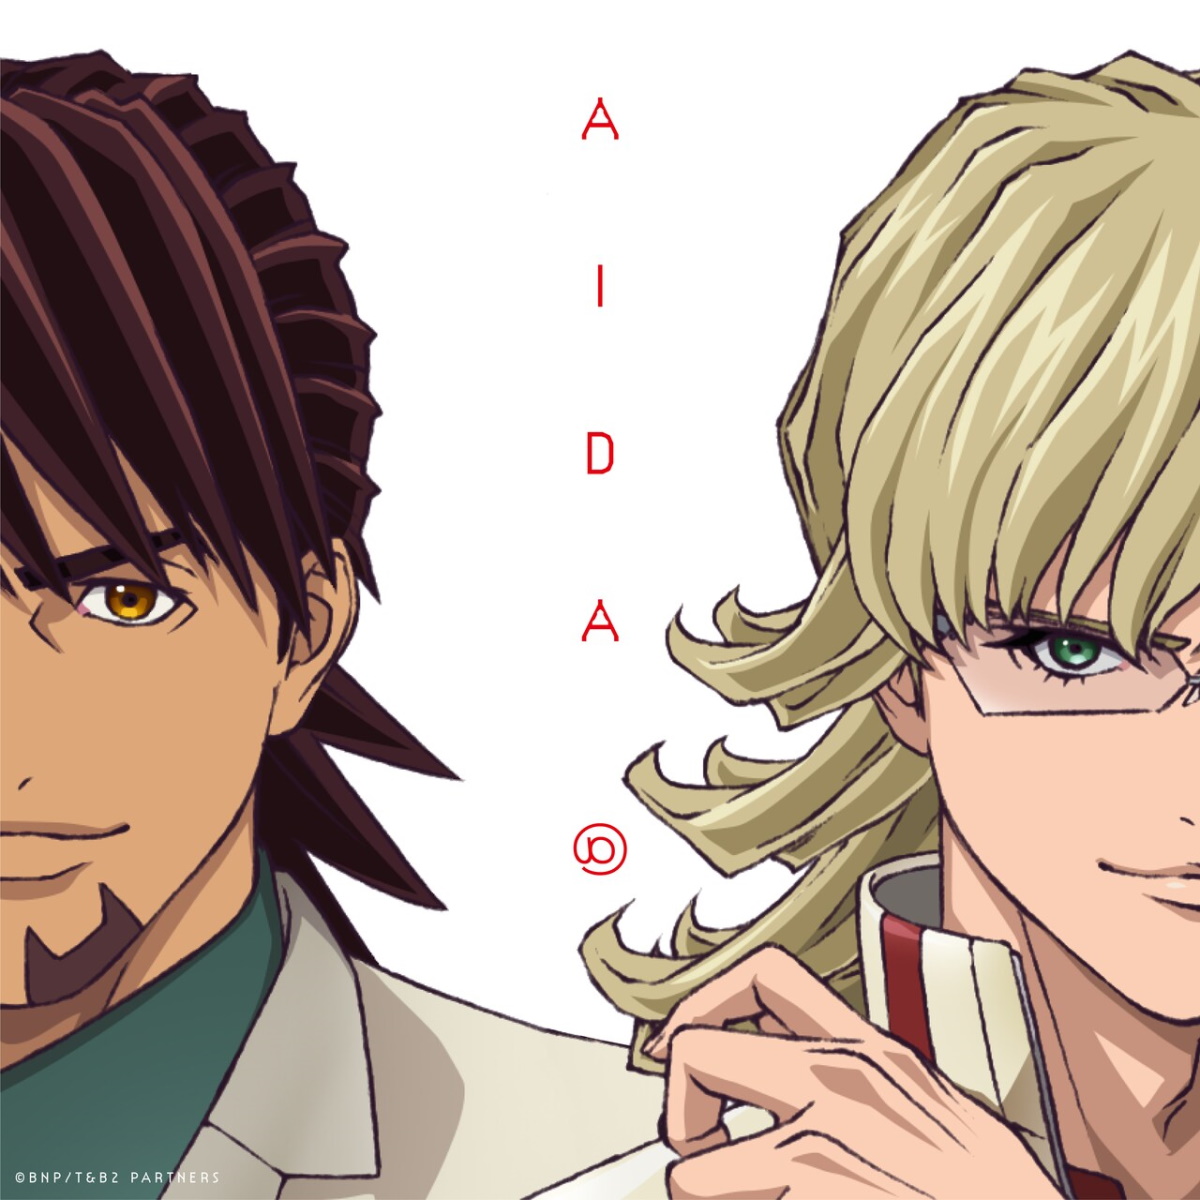 Cover for『ano - AIDA』from the release『AIDA』